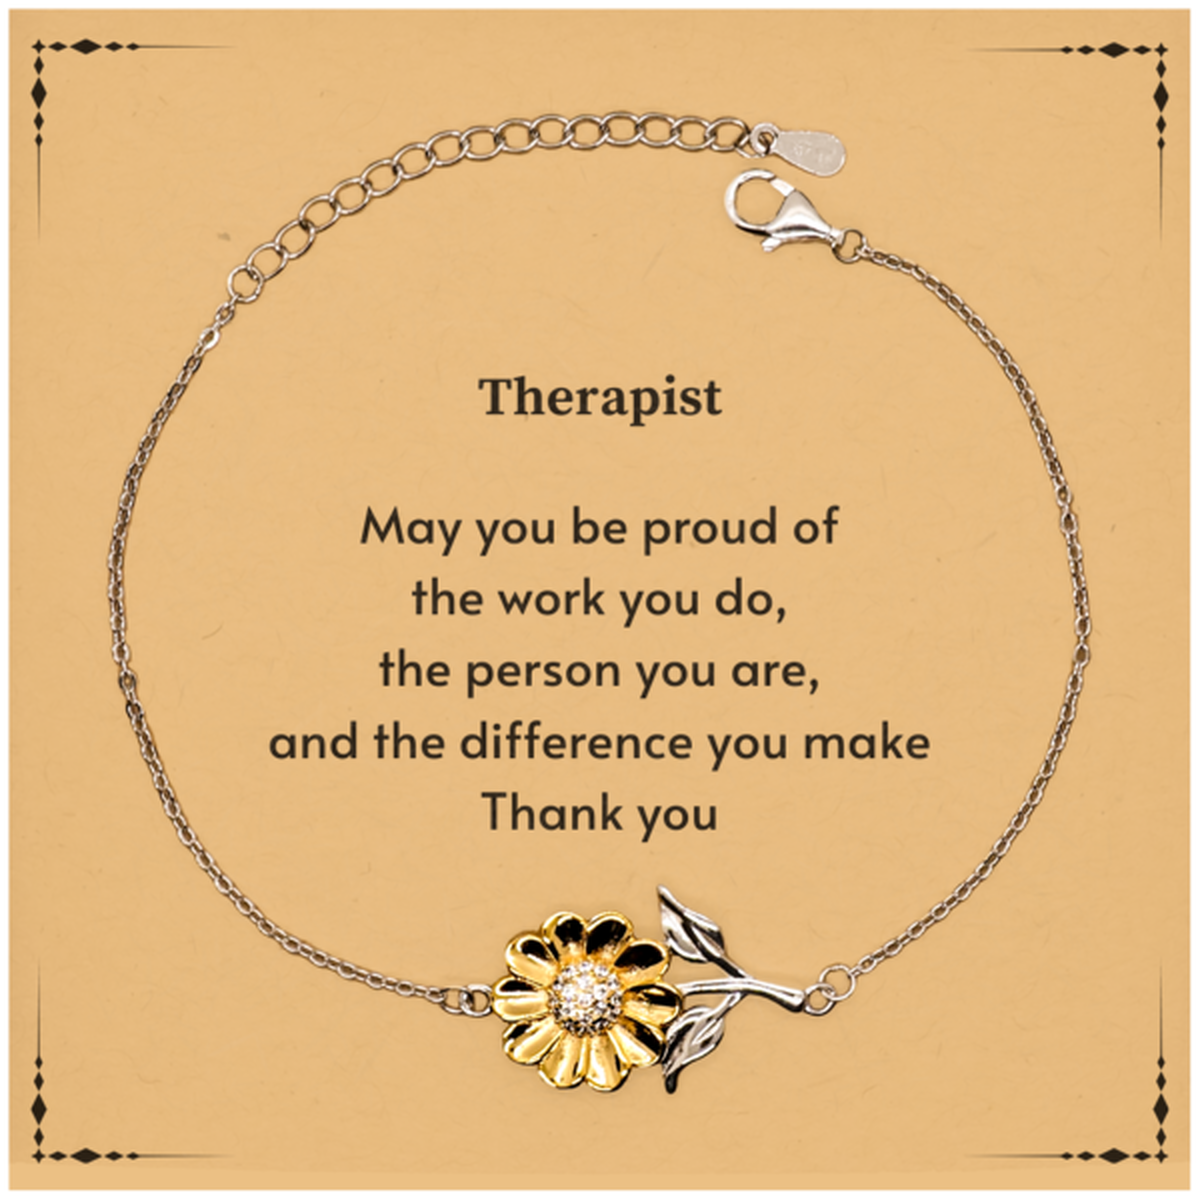 Heartwarming Sunflower Bracelet Retirement Coworkers Gifts for Therapist, Therapist May You be proud of the work you do, the person you are Gifts for Boss Men Women Friends